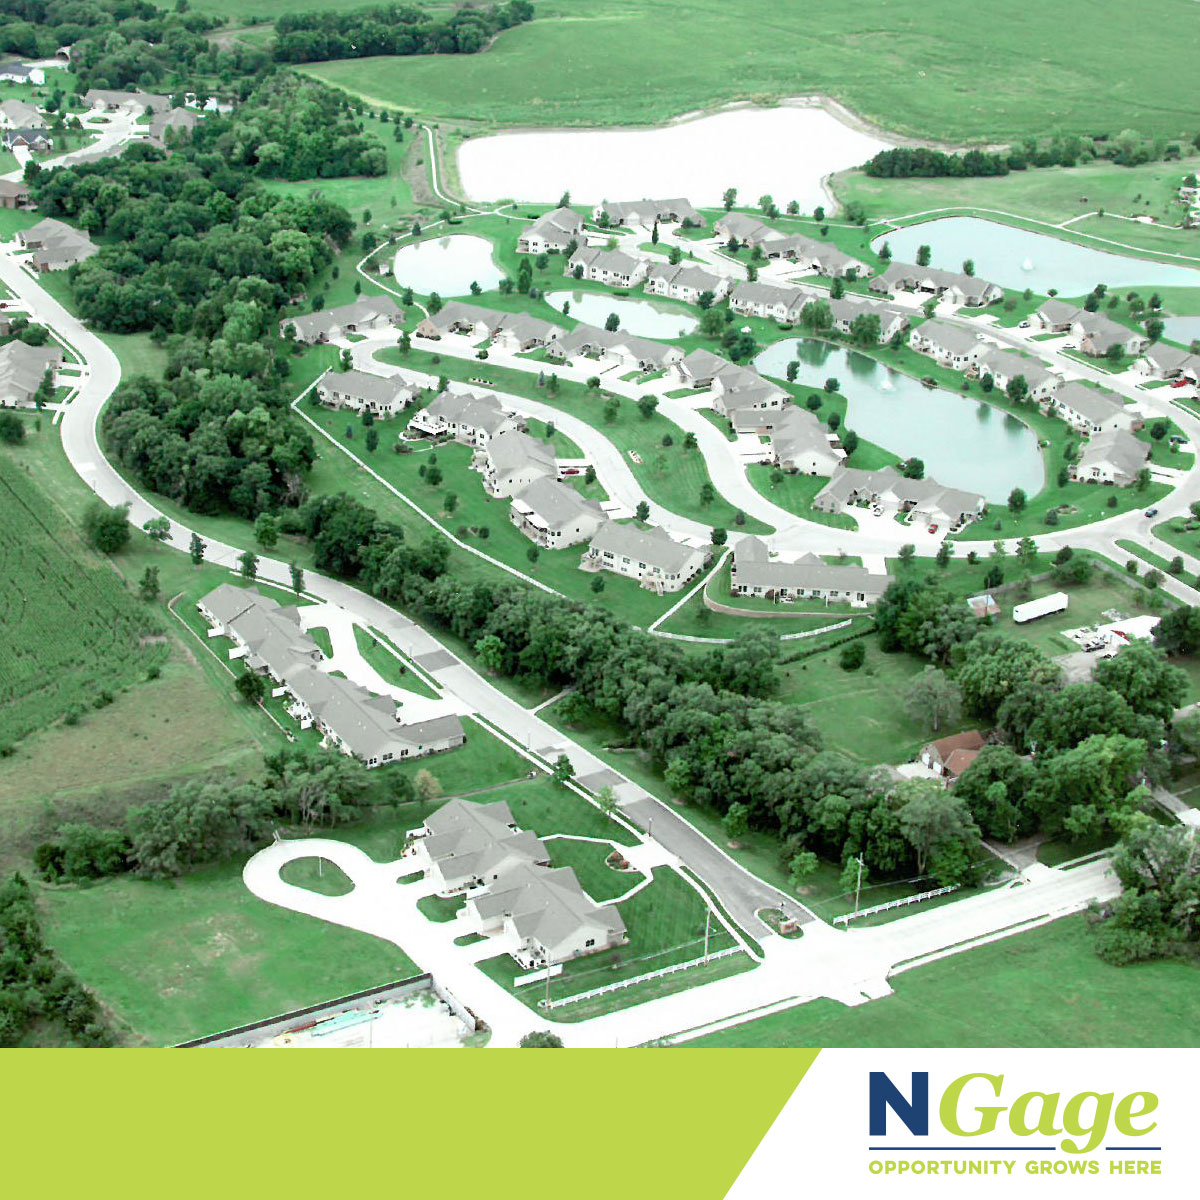 NGage Works to Secure Grants for Housing in Gage County Photo